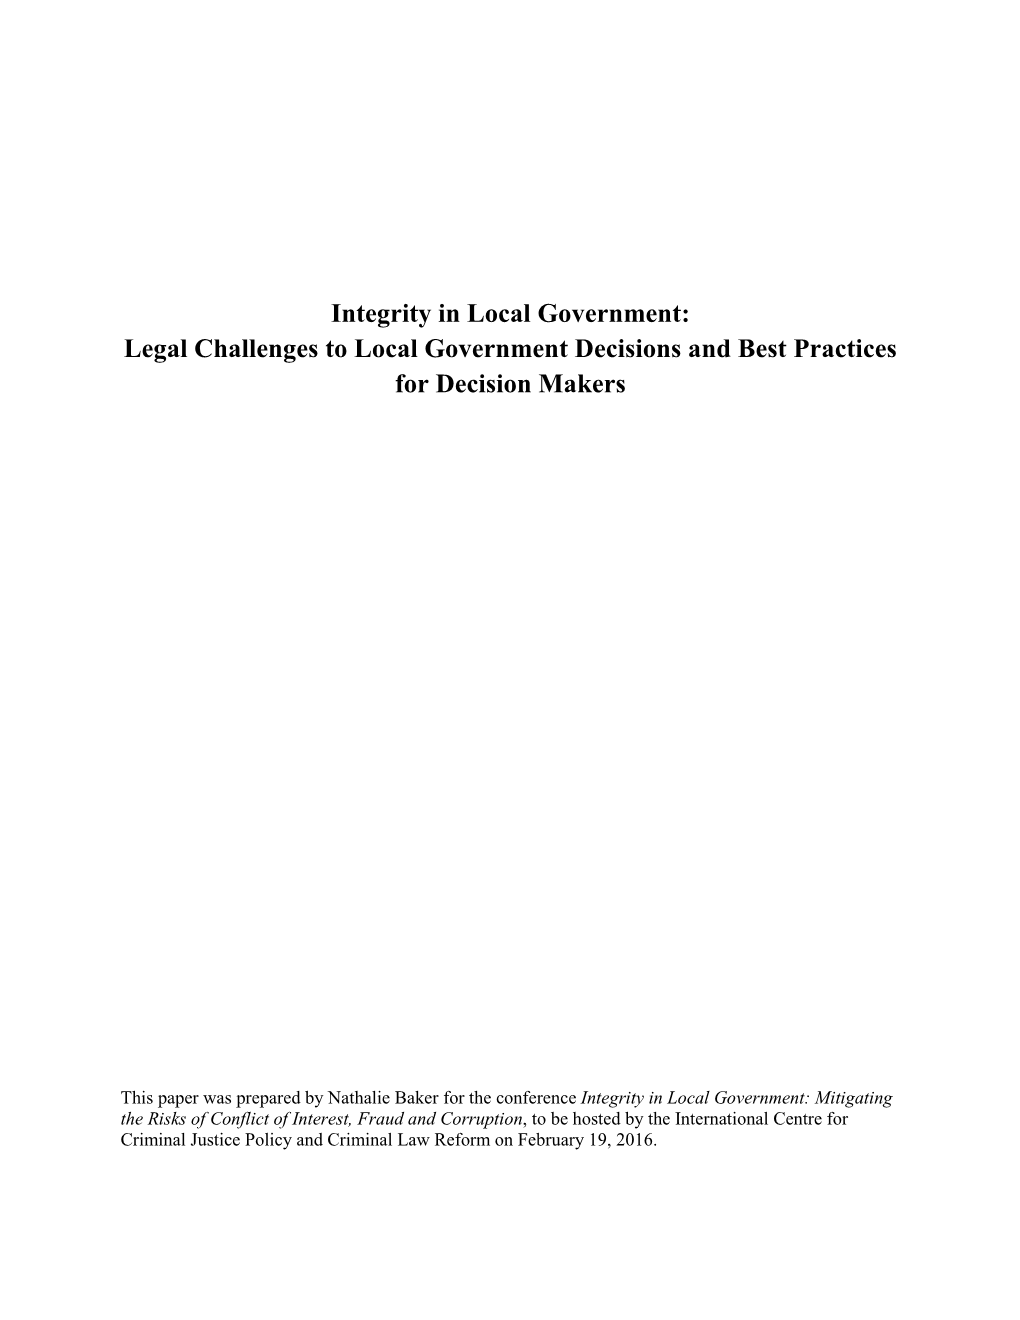 Legal Challenges to Local Government Decisions and Best Practices for Decision Makers